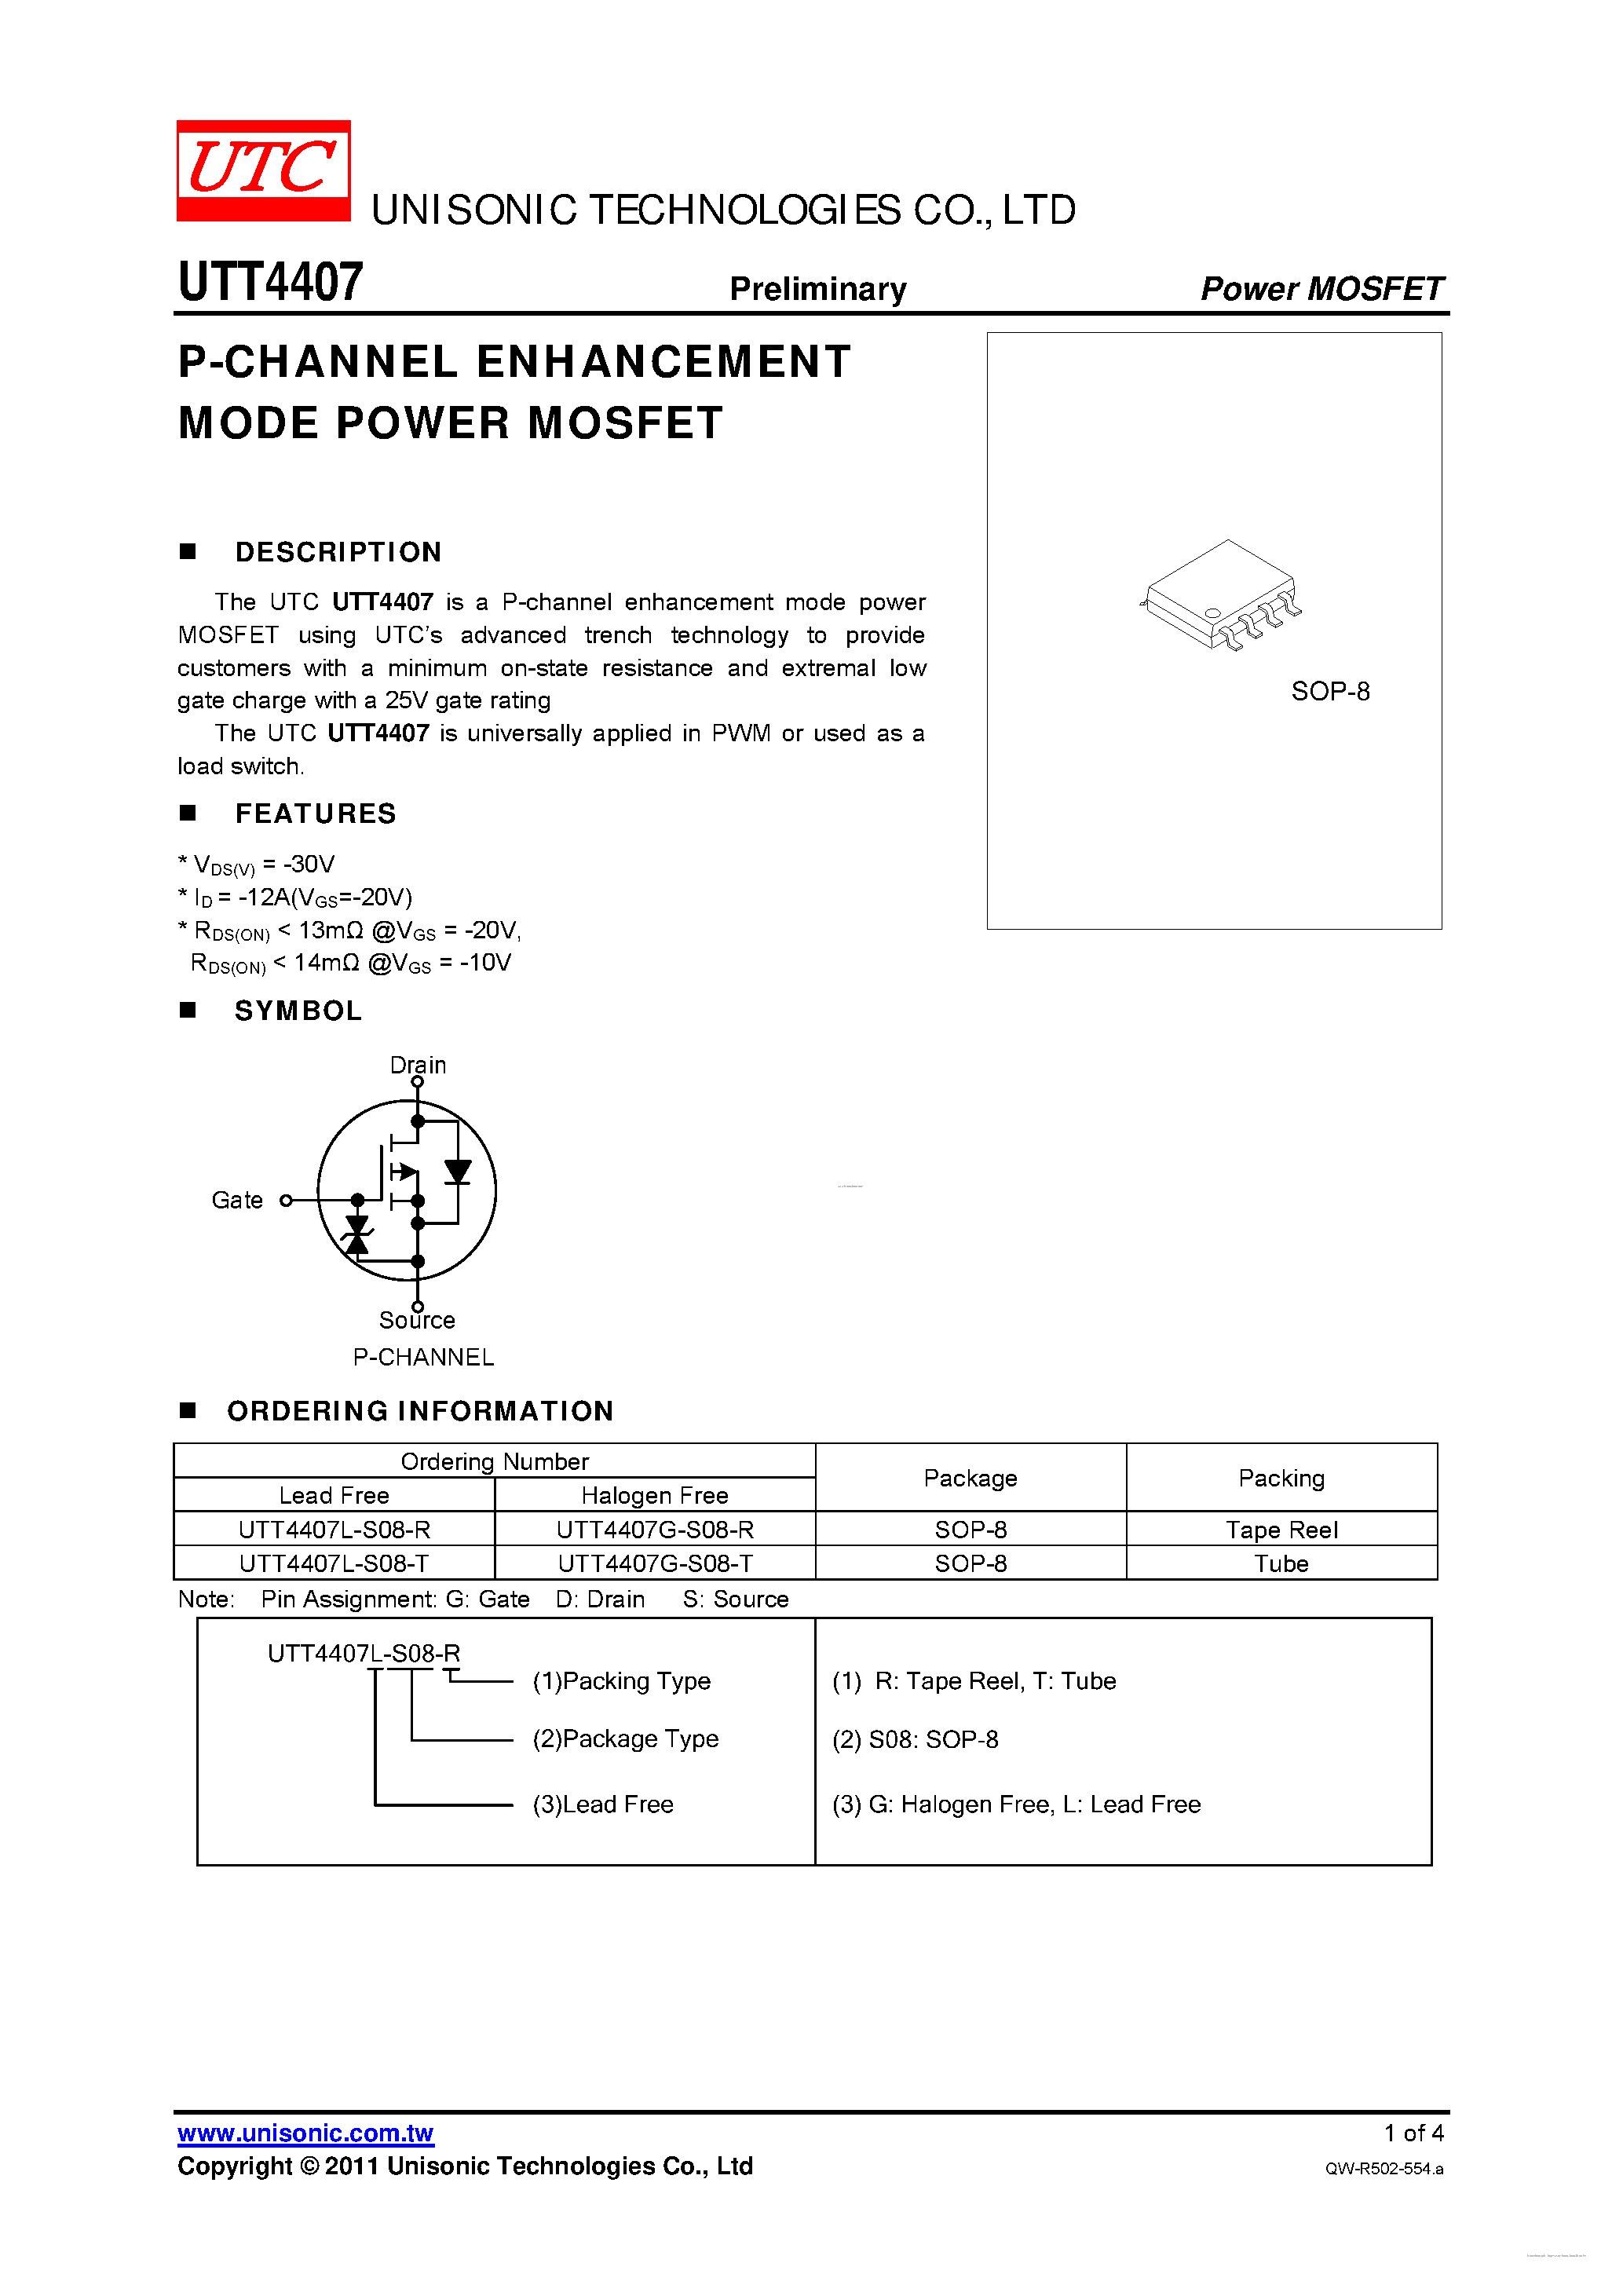 Datasheet UTT4407 - P-CHANNEL POWER MOSFET page 1